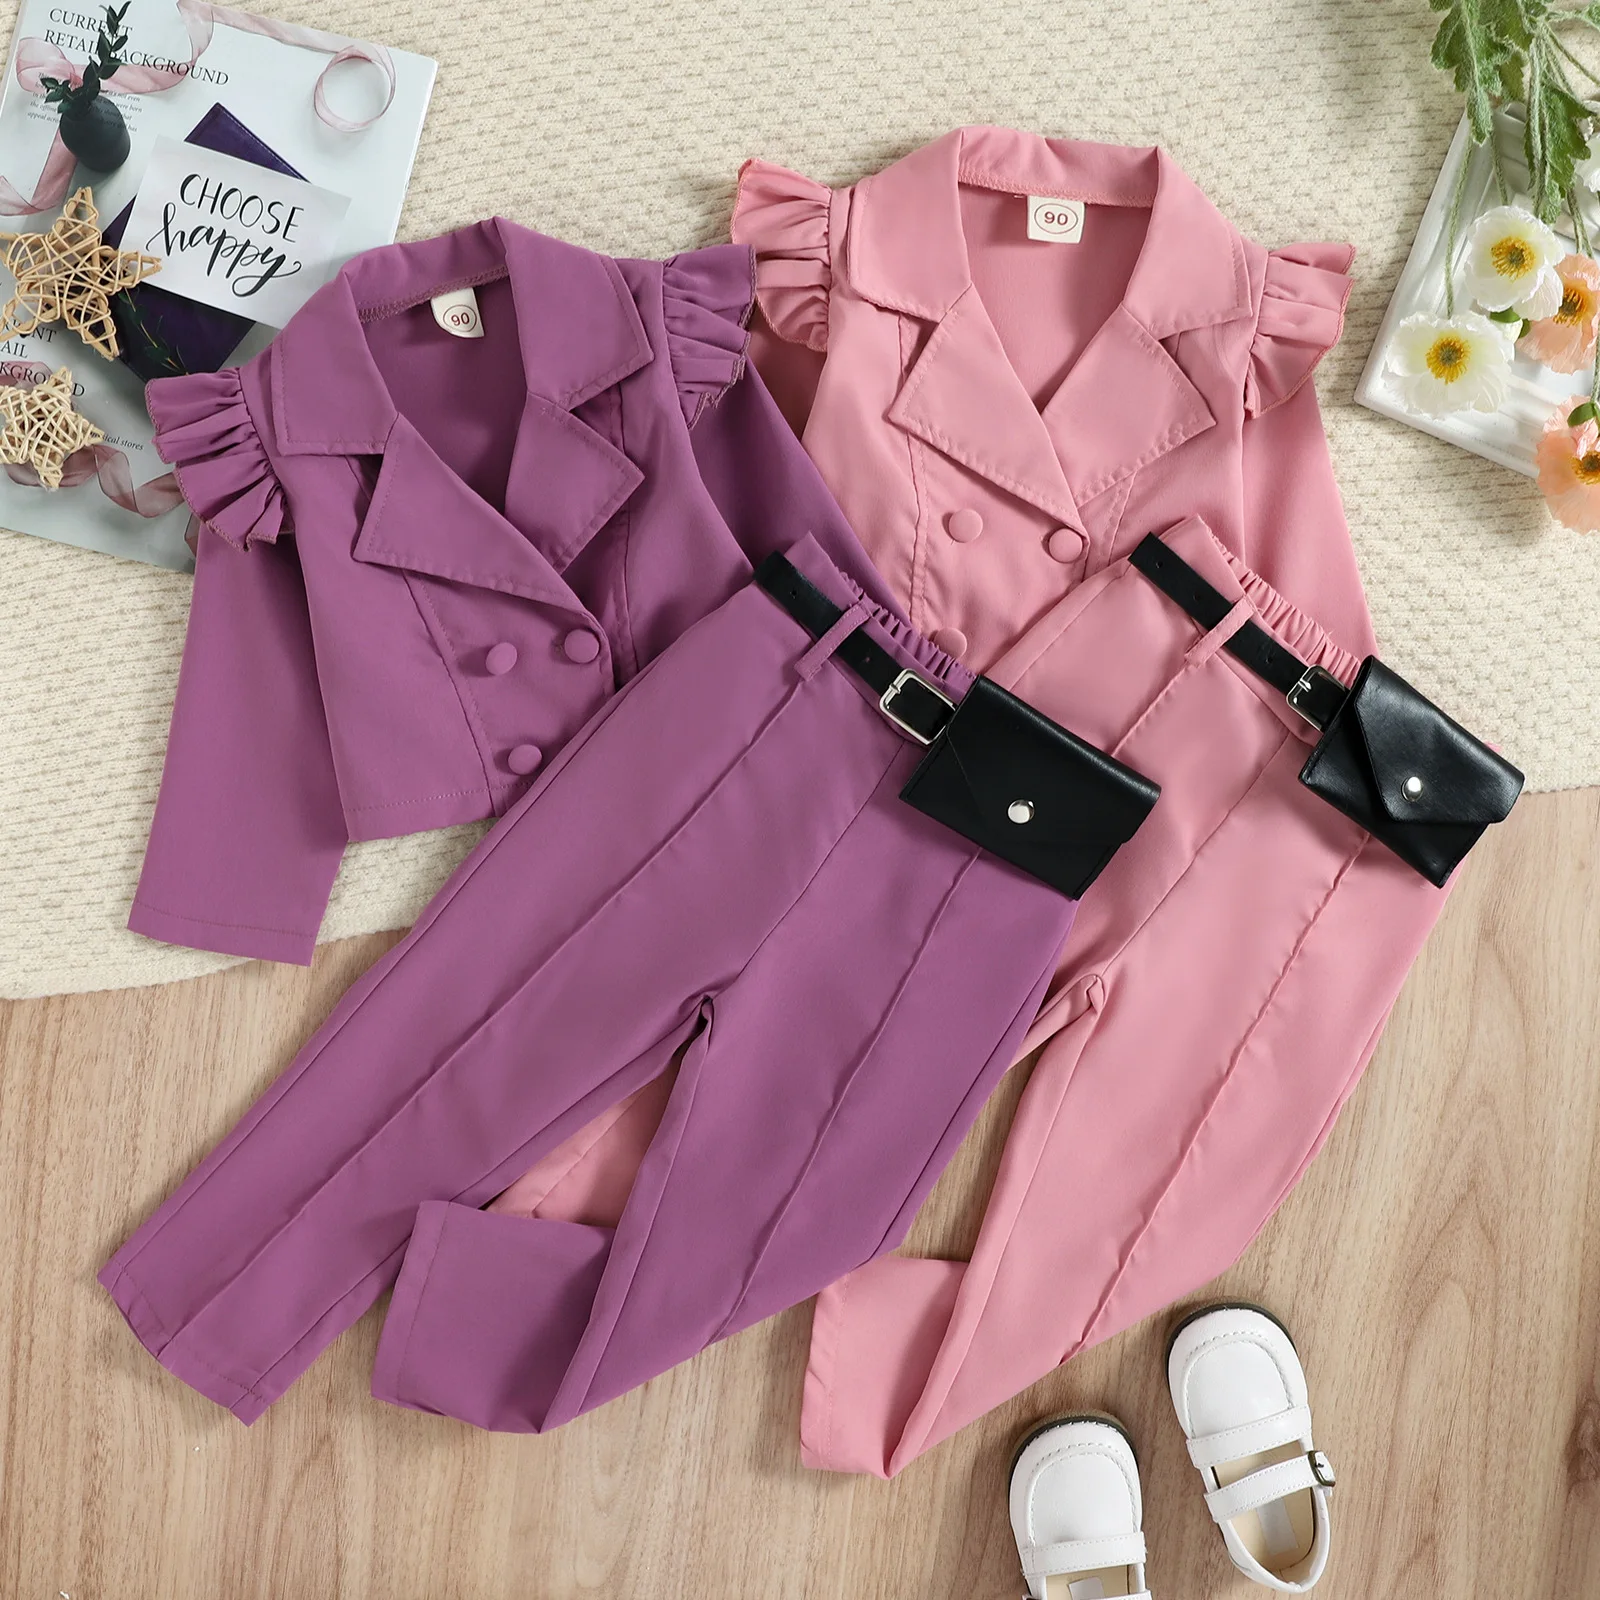 Girls clothes 2022 new autumn suit collar top pants two-piece fashion candy color girls's clothing sets with waist bag